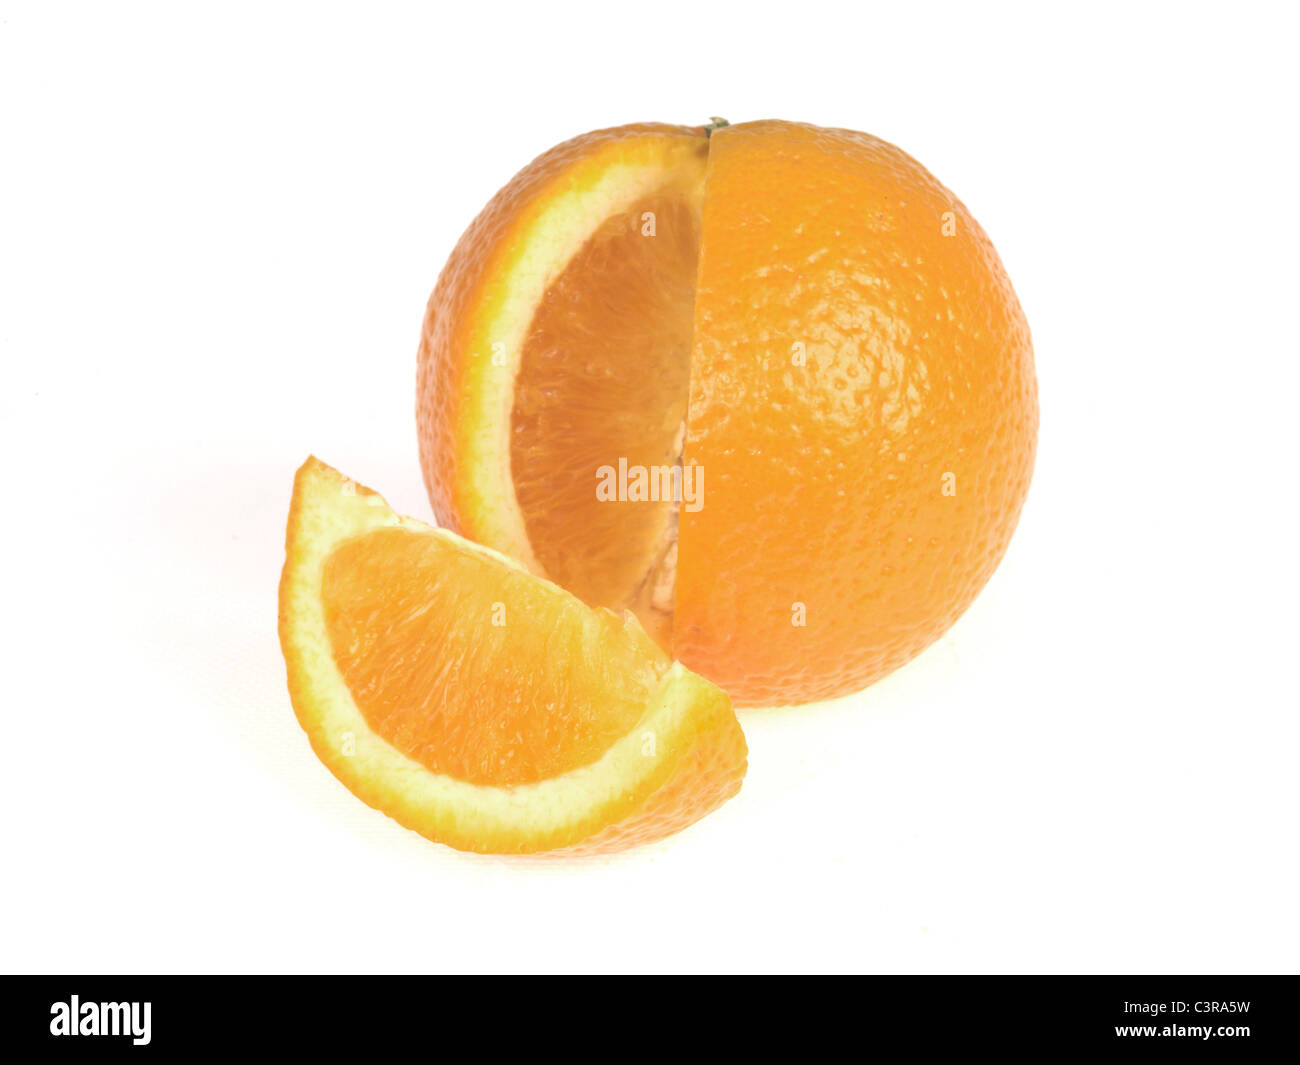 Fresh Healthy Tropical Whole Ripe Juicy Orange Fruit With A Segment Cut Out Against A White Background with A Clipping Path And No People Stock Photo